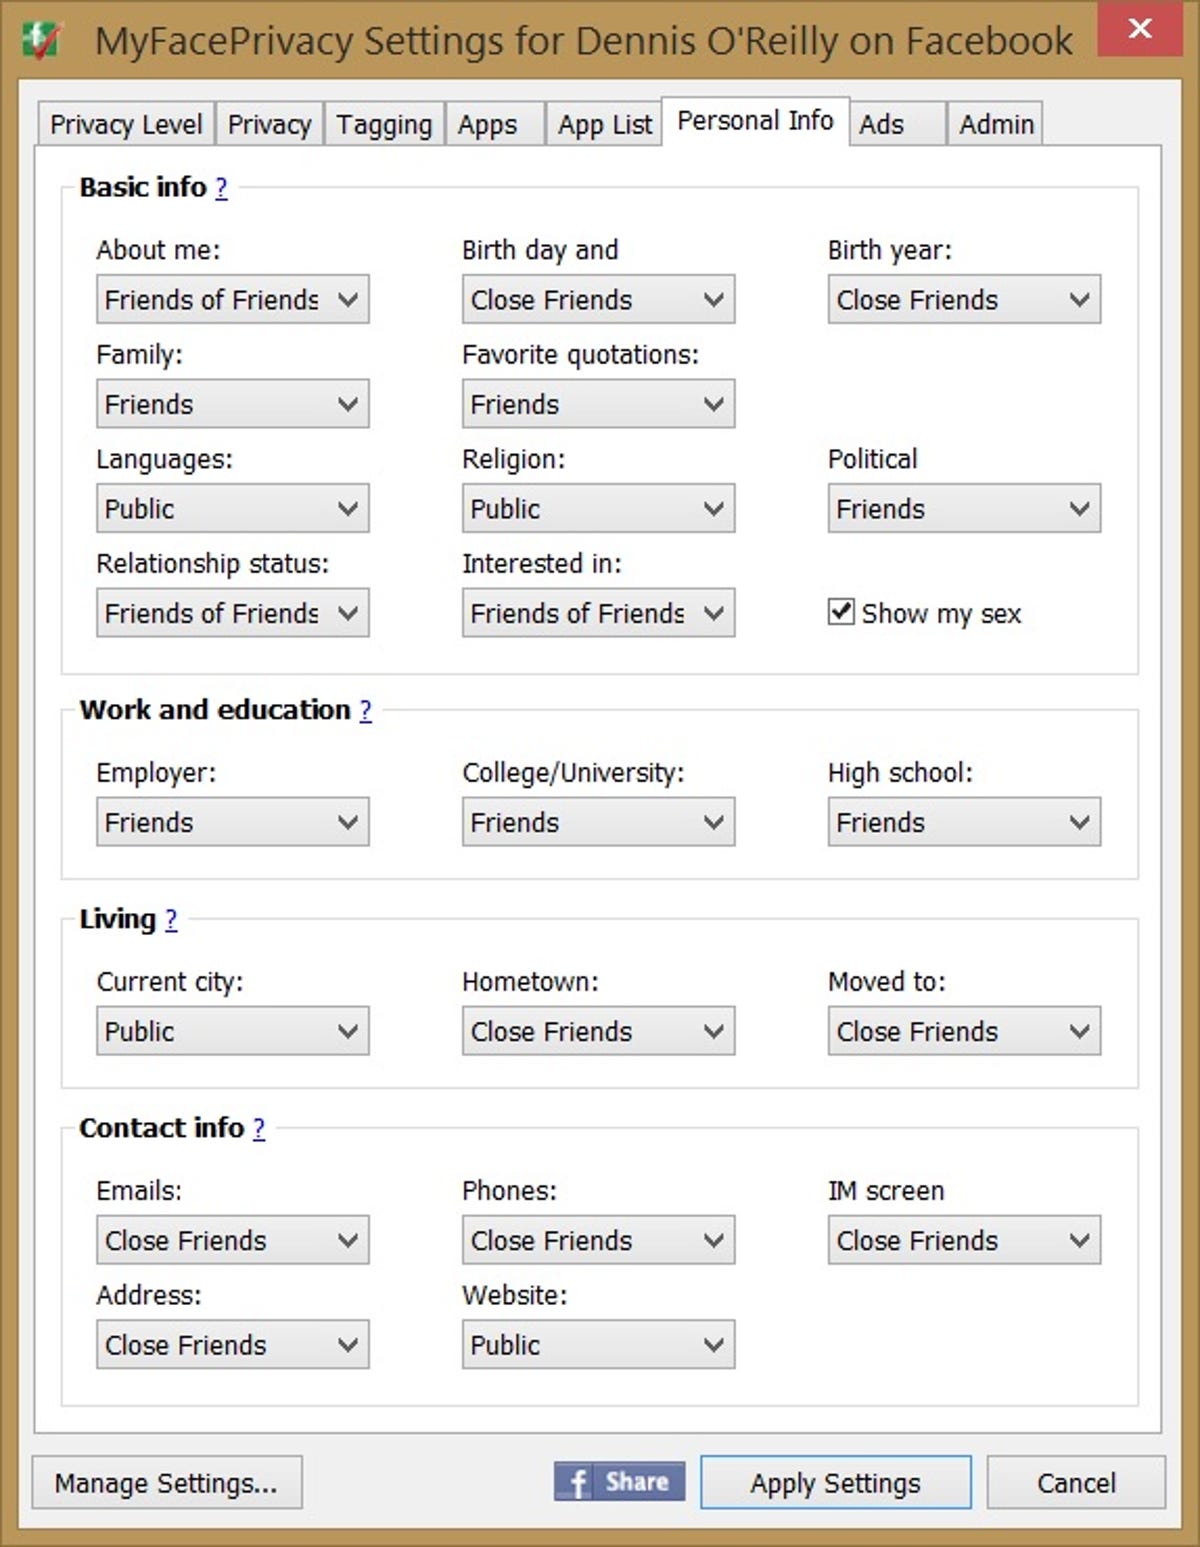 MyFacePrivacy Personal Info settings